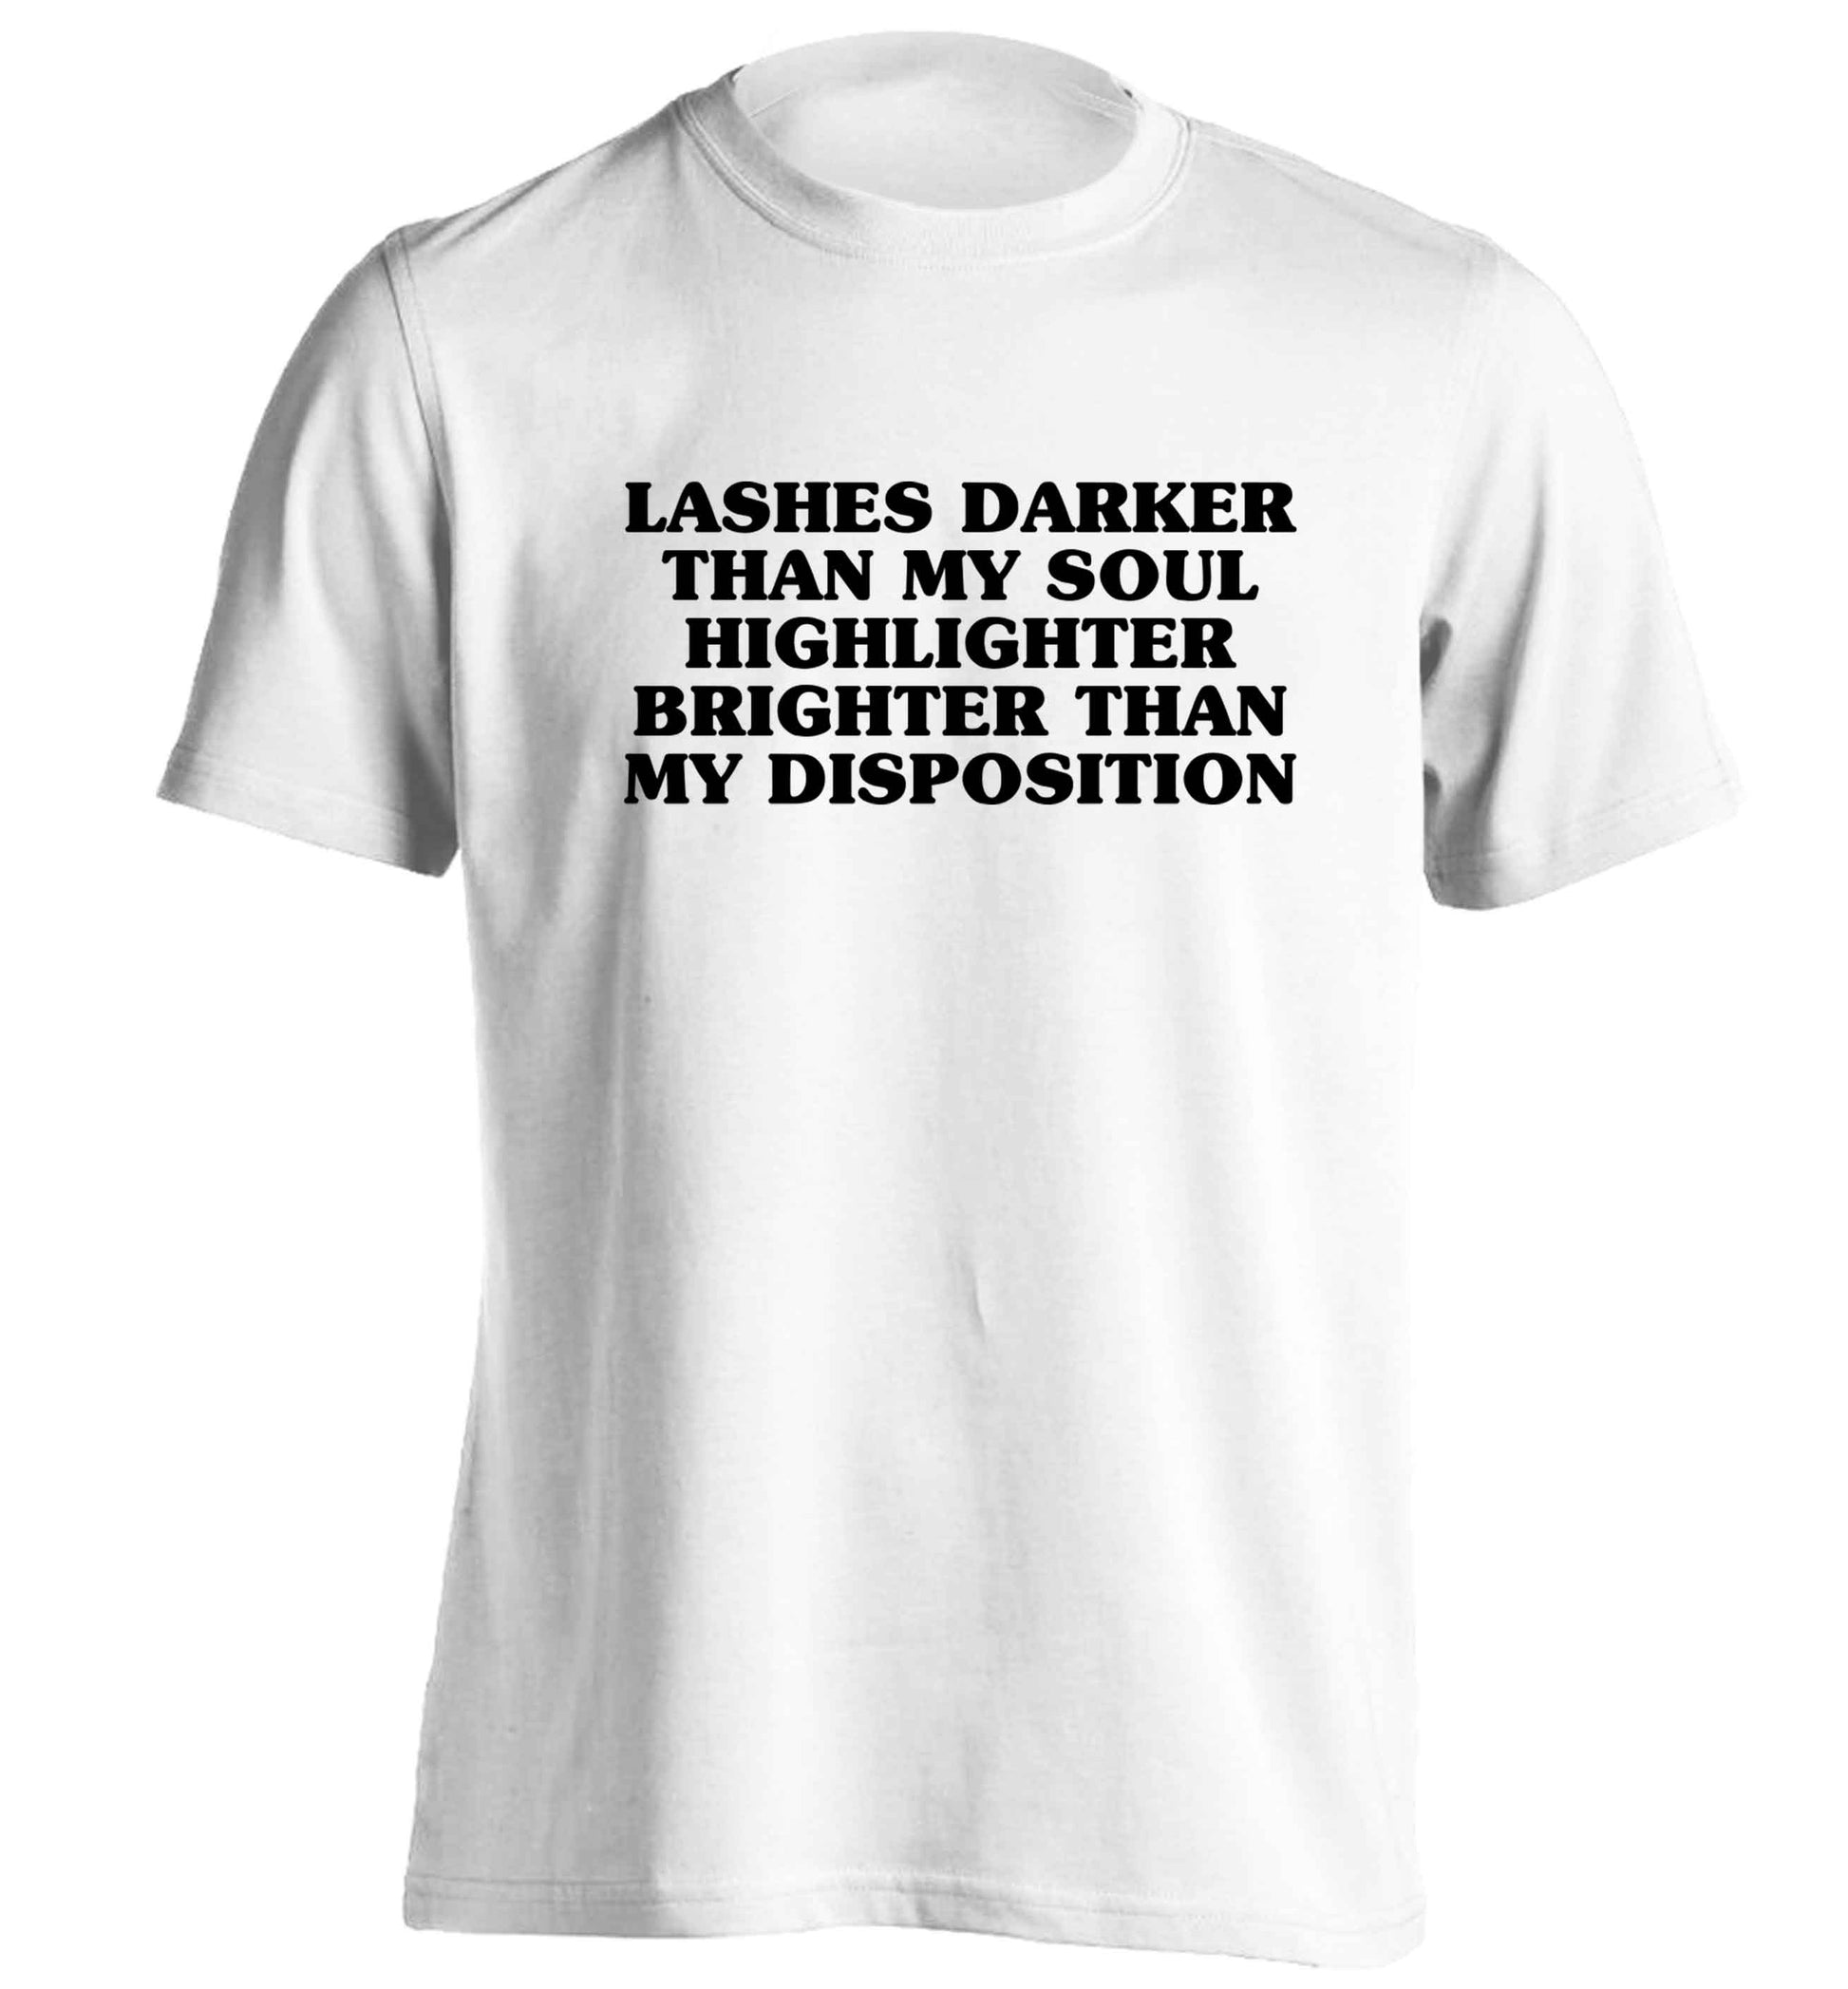 Lashes darker than my soul, highlighter brighter than my disposition adults unisex white Tshirt 2XL